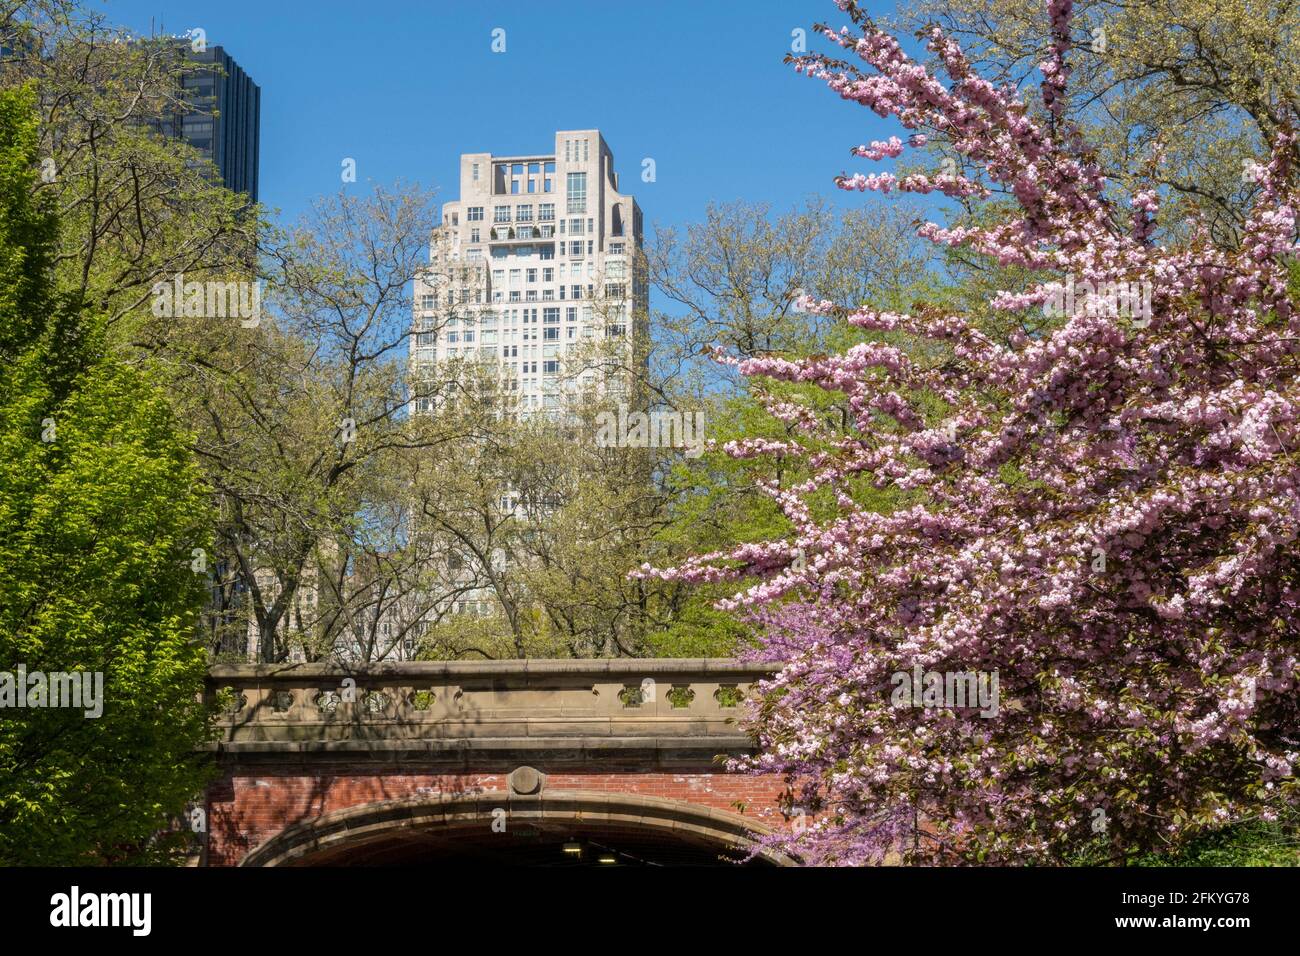 Century Apartments, 25 Central Park West, as Seen from Central Park's Driprock Arch, New York, NY Stock Photo